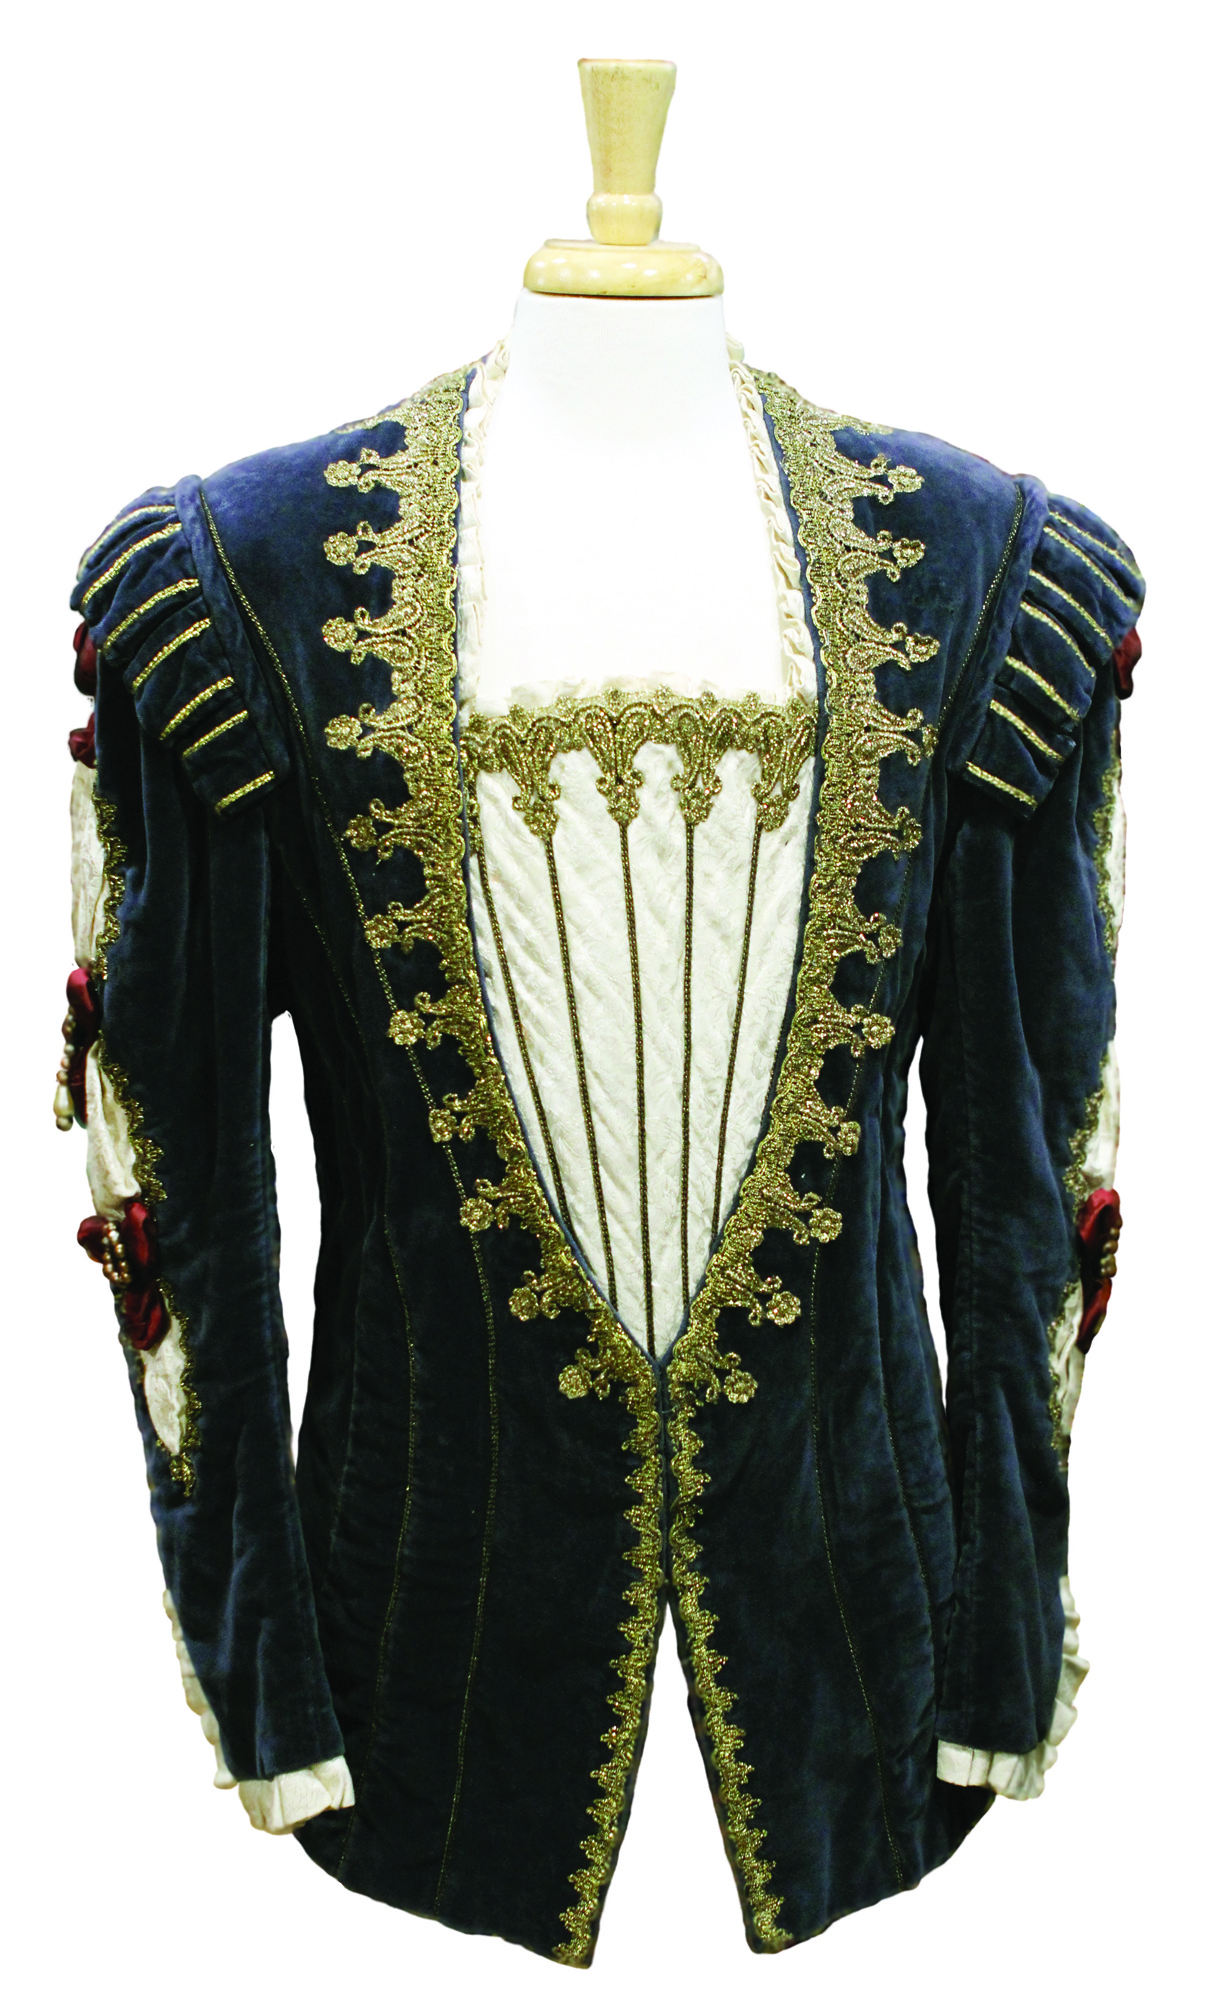 This costume for Romeo in “Romeo and Juliet” has been used for the French version of the story by Charles Gounod, but was originally designed for  Vincenzo Bellini’s Italian opera of the story.